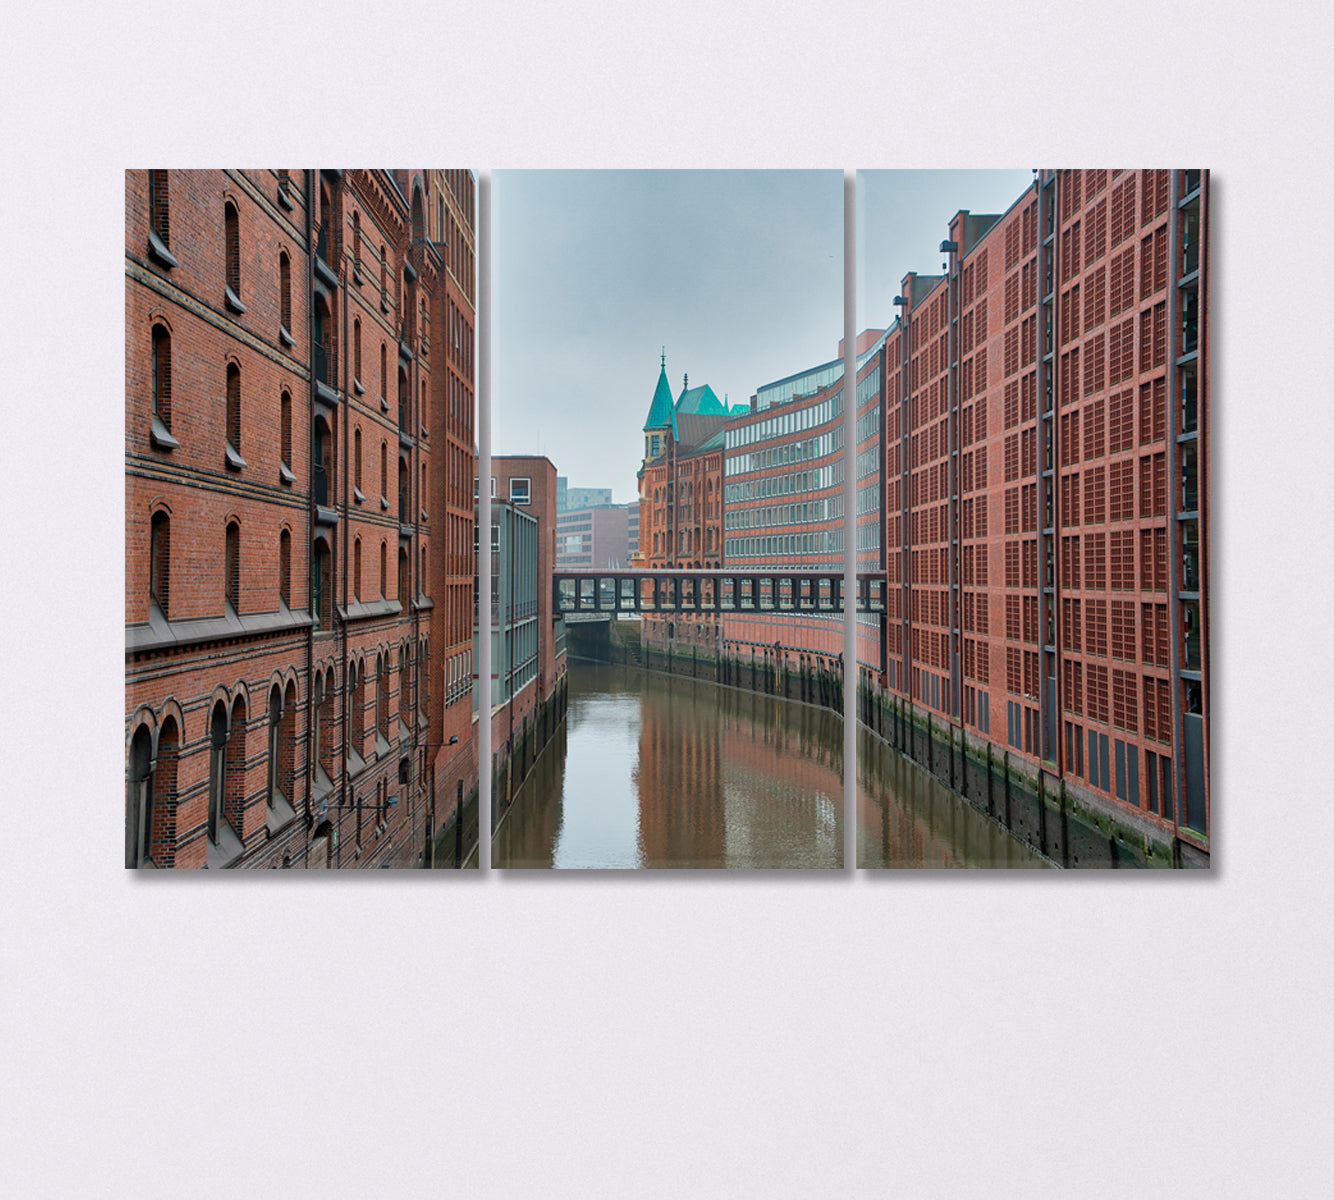 The Canals of Hamburg on the Elbe River Canvas Print-Canvas Print-CetArt-3 Panels-36x24 inches-CetArt